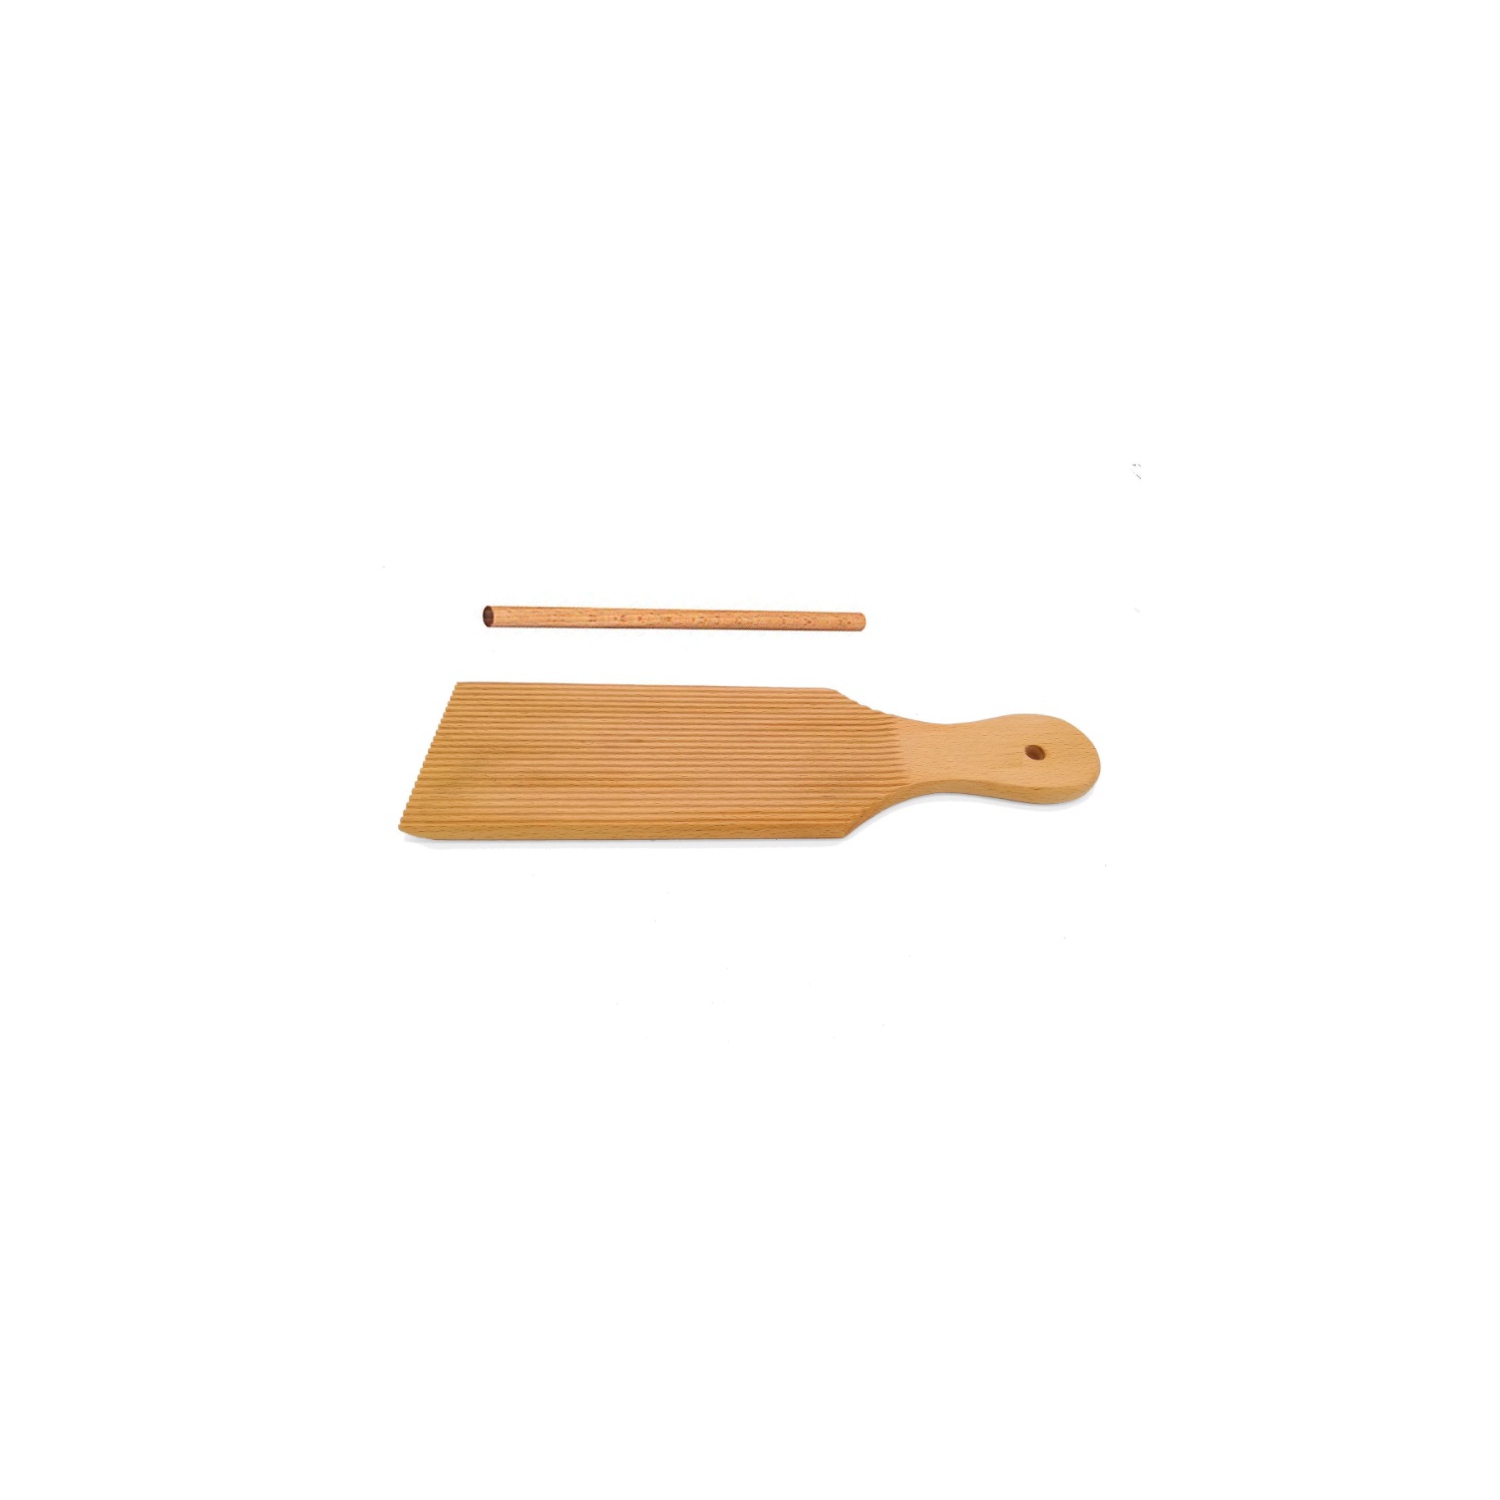 Pasta Maker, Gnocchi Board Paddle, Beech Wood Butter Paddle, Macaroni Maker, Rolling Pin, Dough Scraper, Gift for her